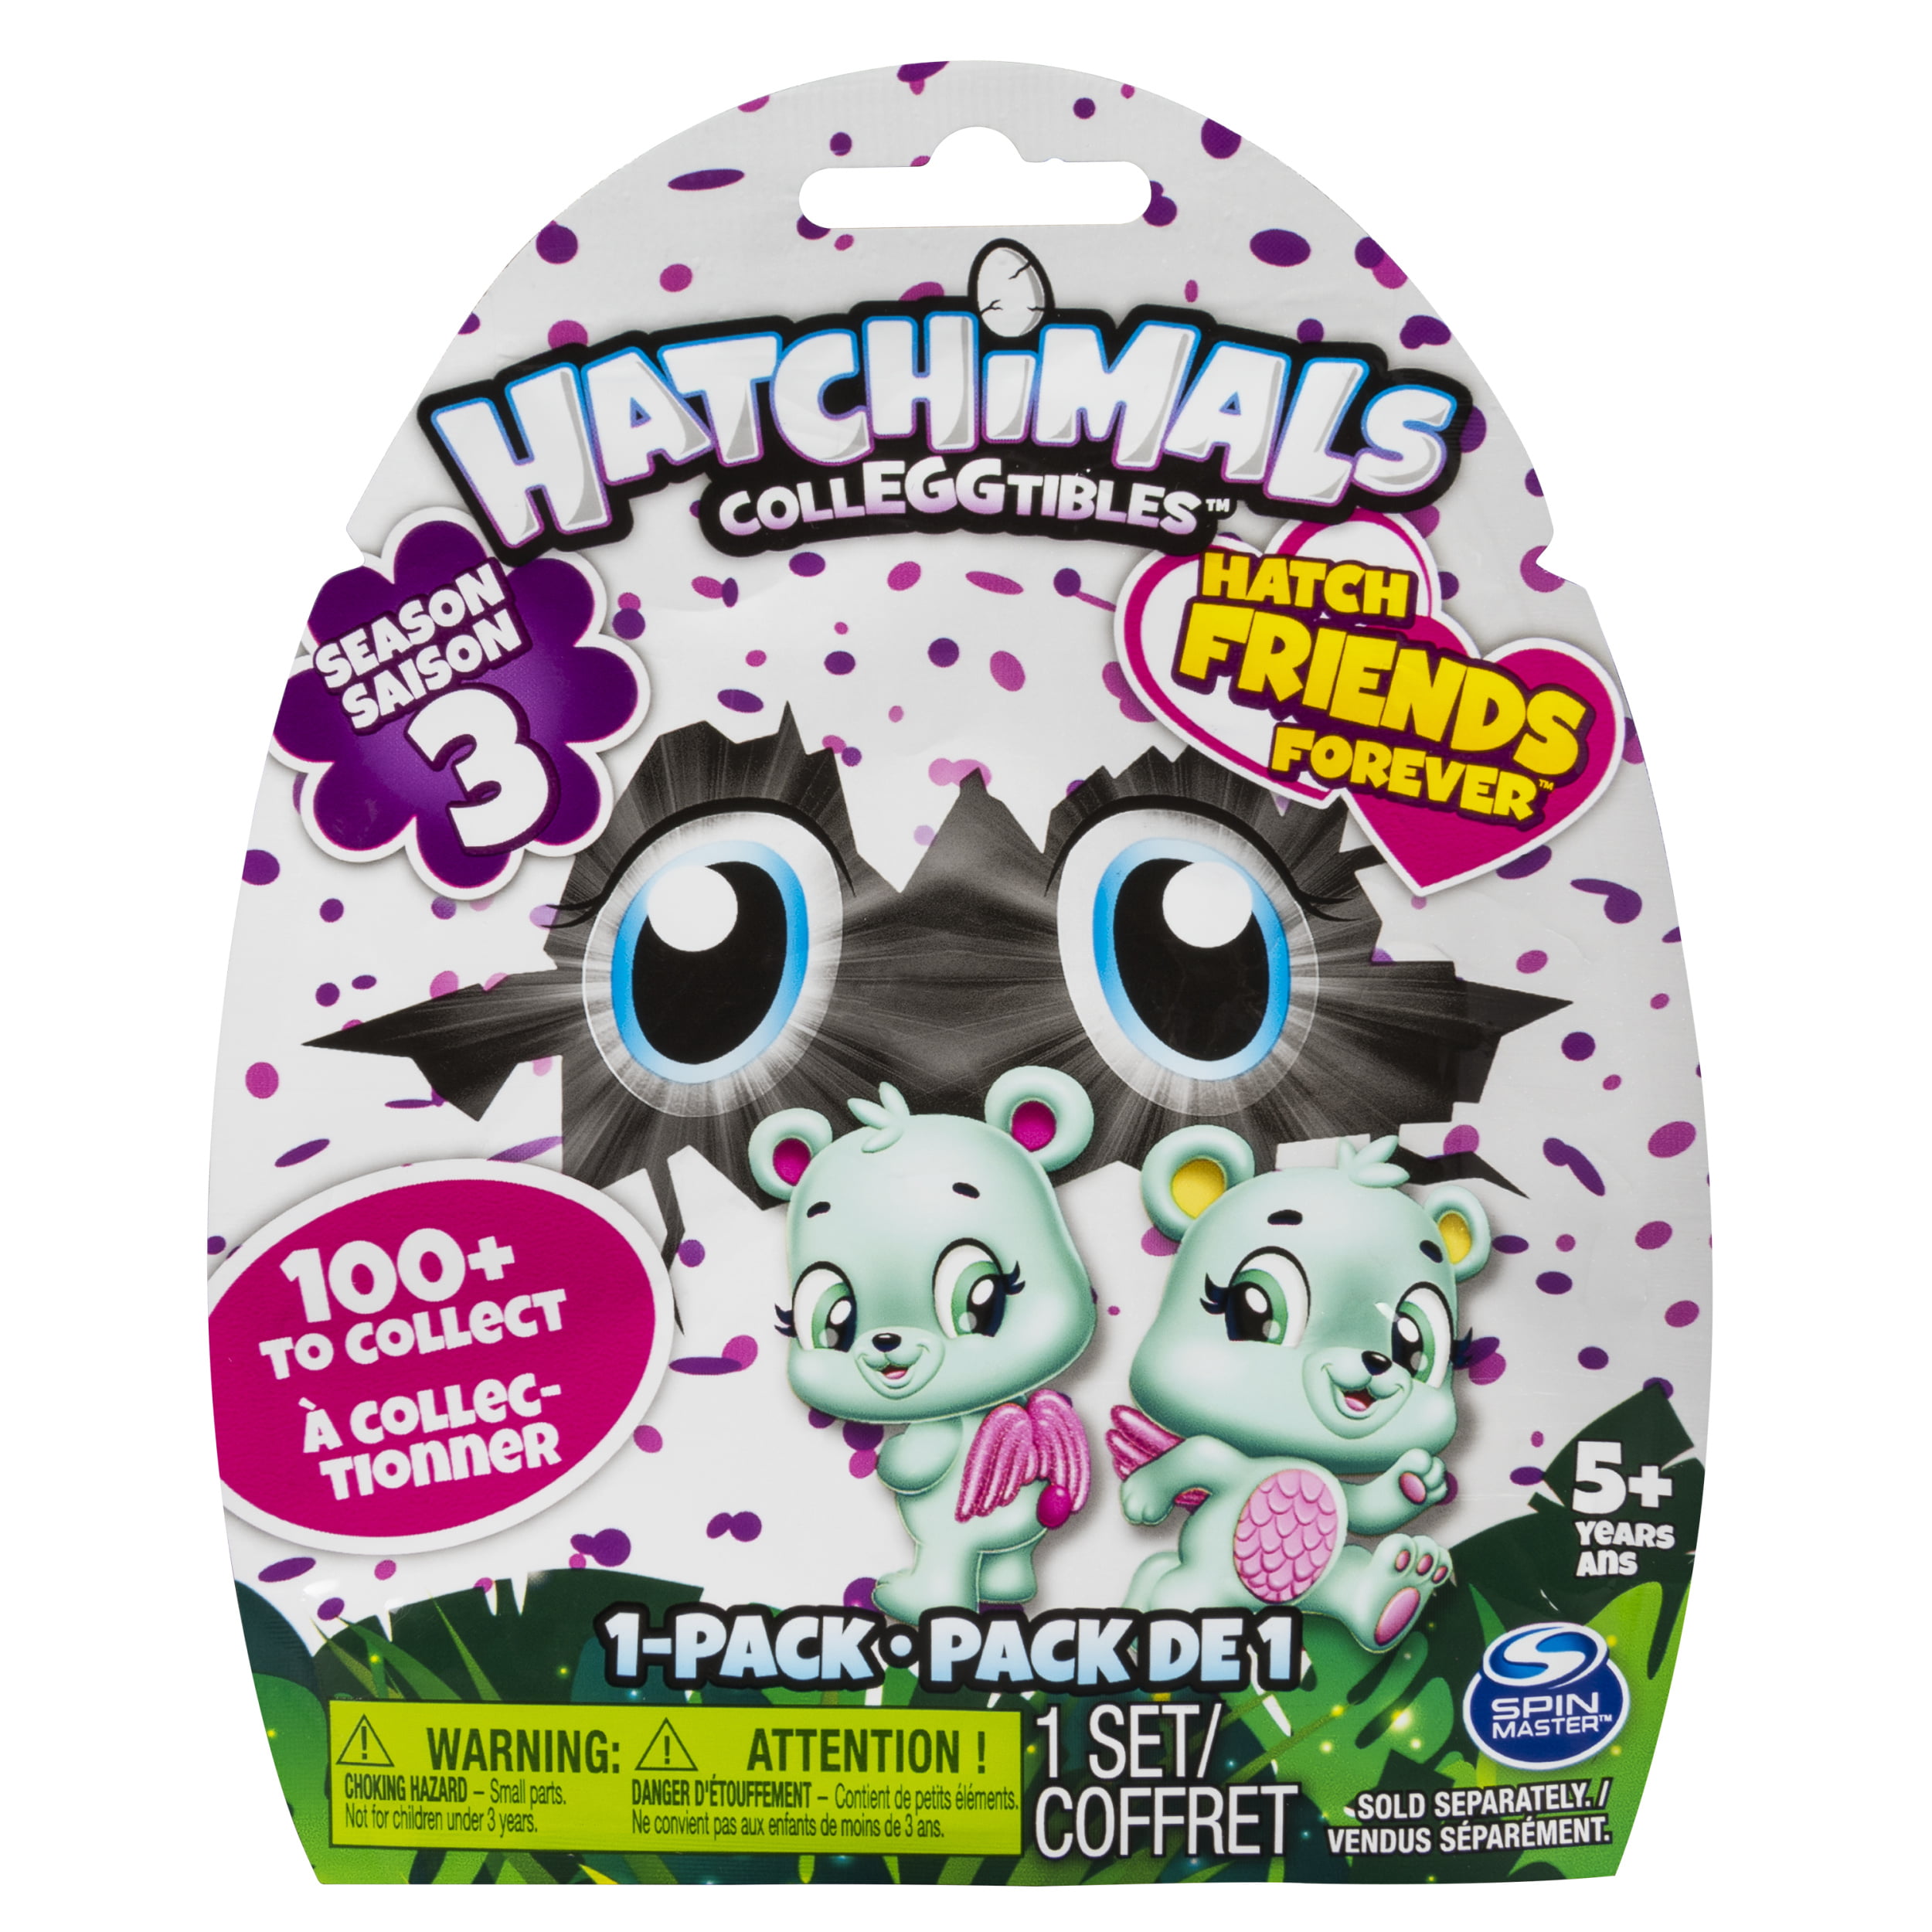 Hatchimals Colleggtibles 4Pk+Bonus Pack Collectable New Free Shipping 